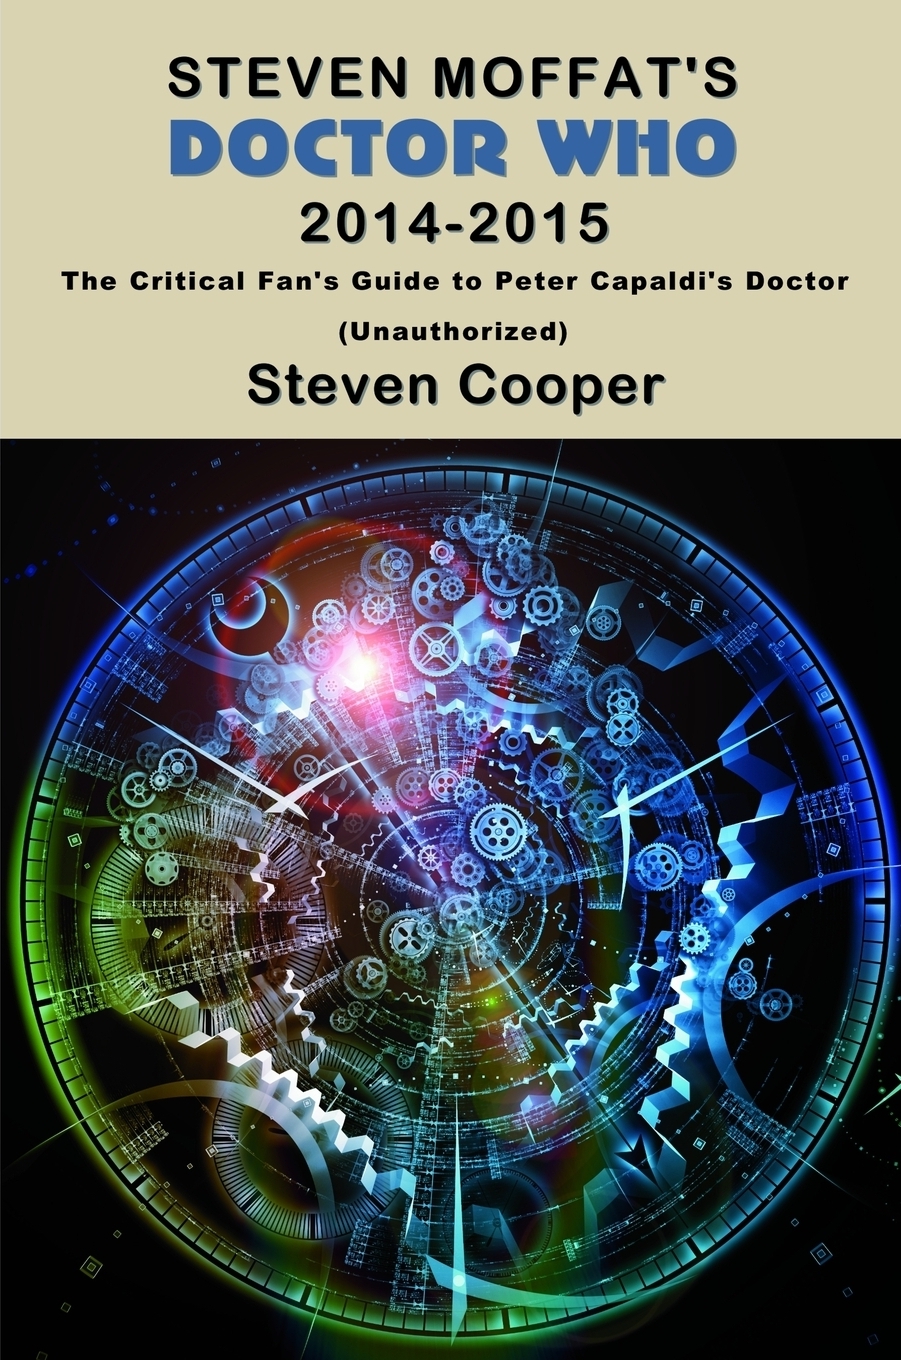 фото Steven Moffat's Doctor Who 2014-2015. The Critical Fan's Guide to Peter Capaldi's Doctor (Unauthorized)